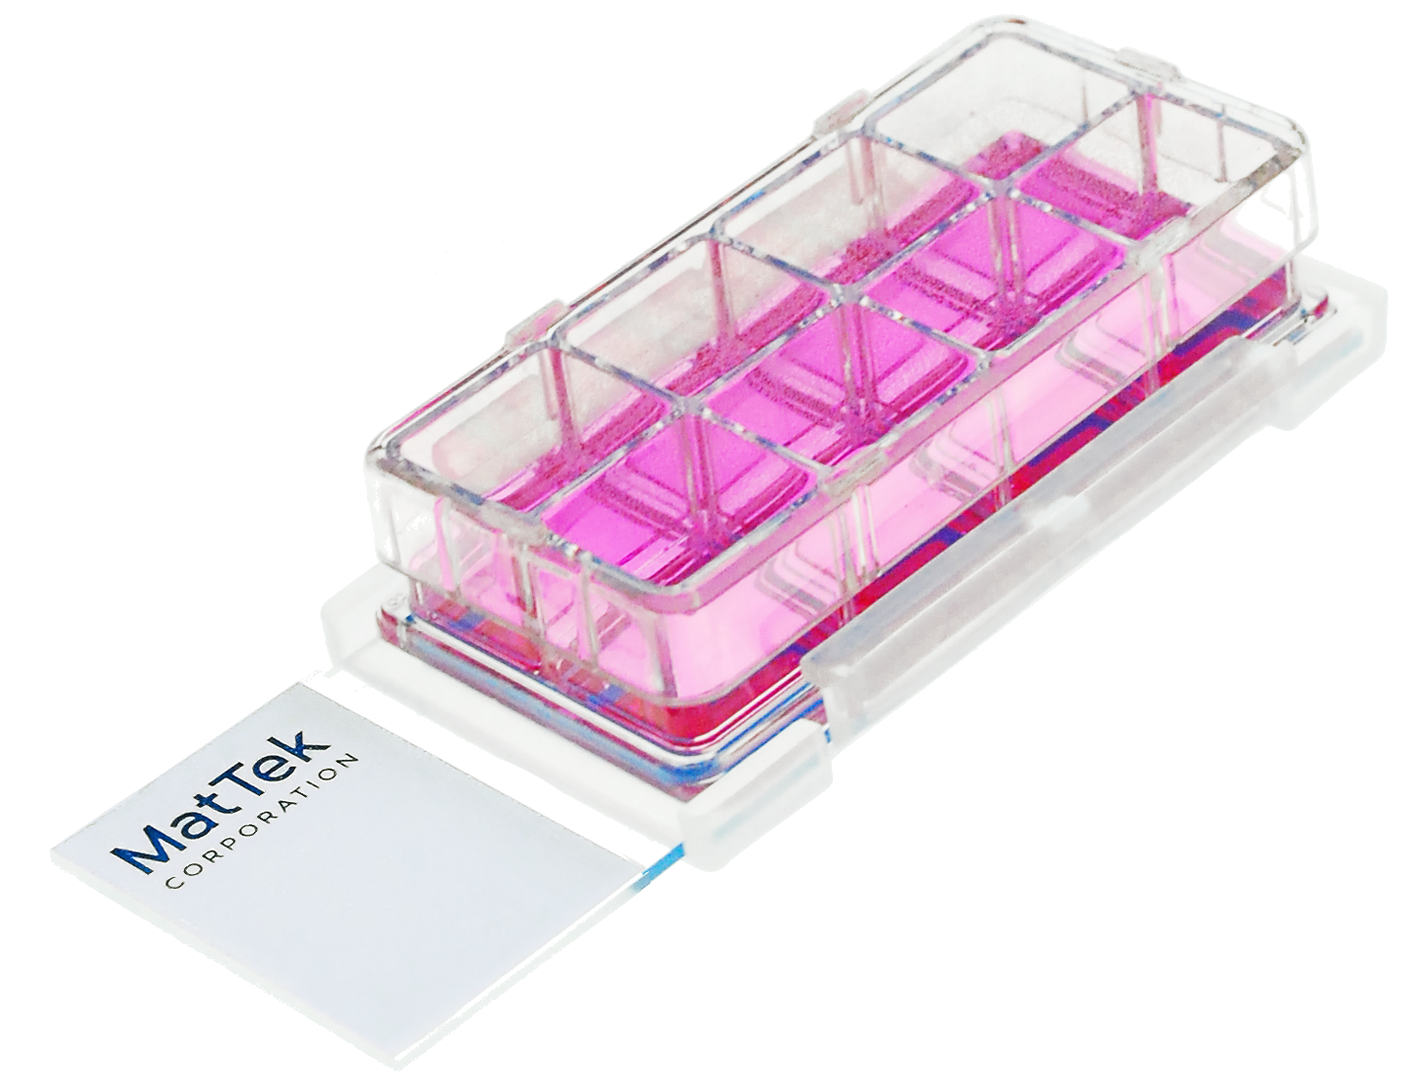 Chambered Cell Culture Slides